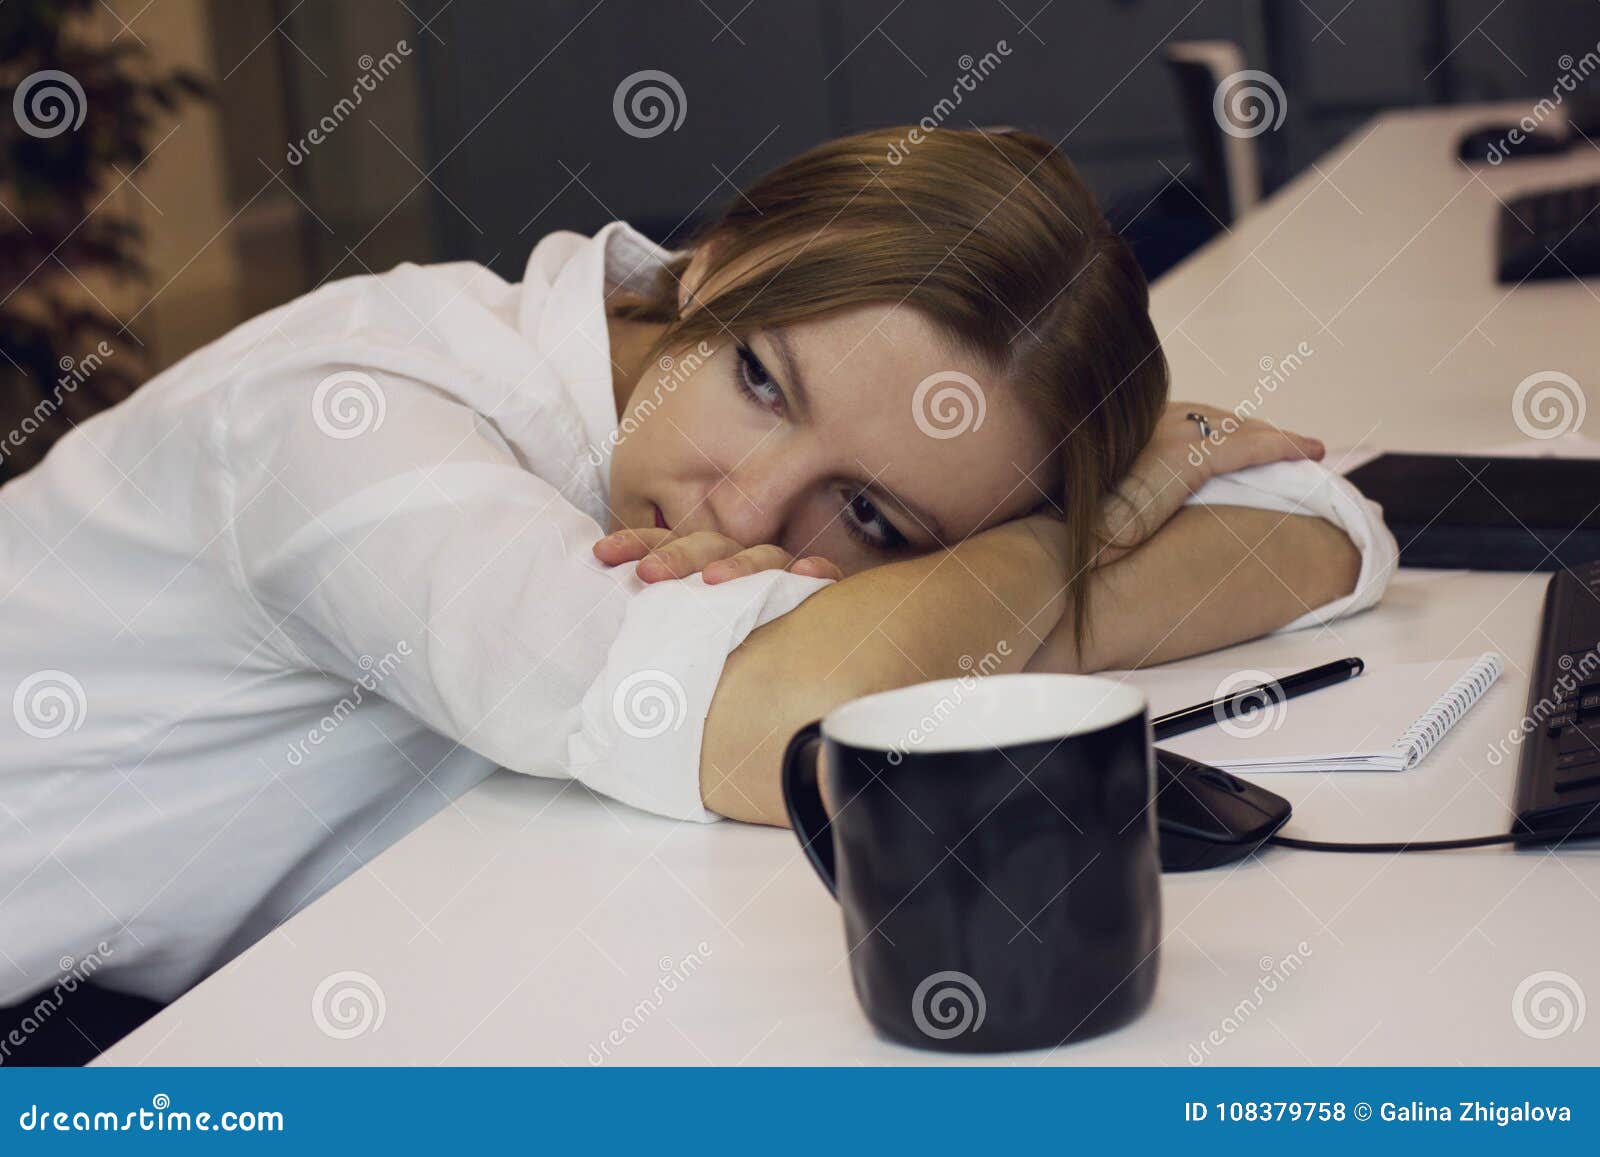 Tired Young Woman Laid Her Head Down On The Desk In The Office